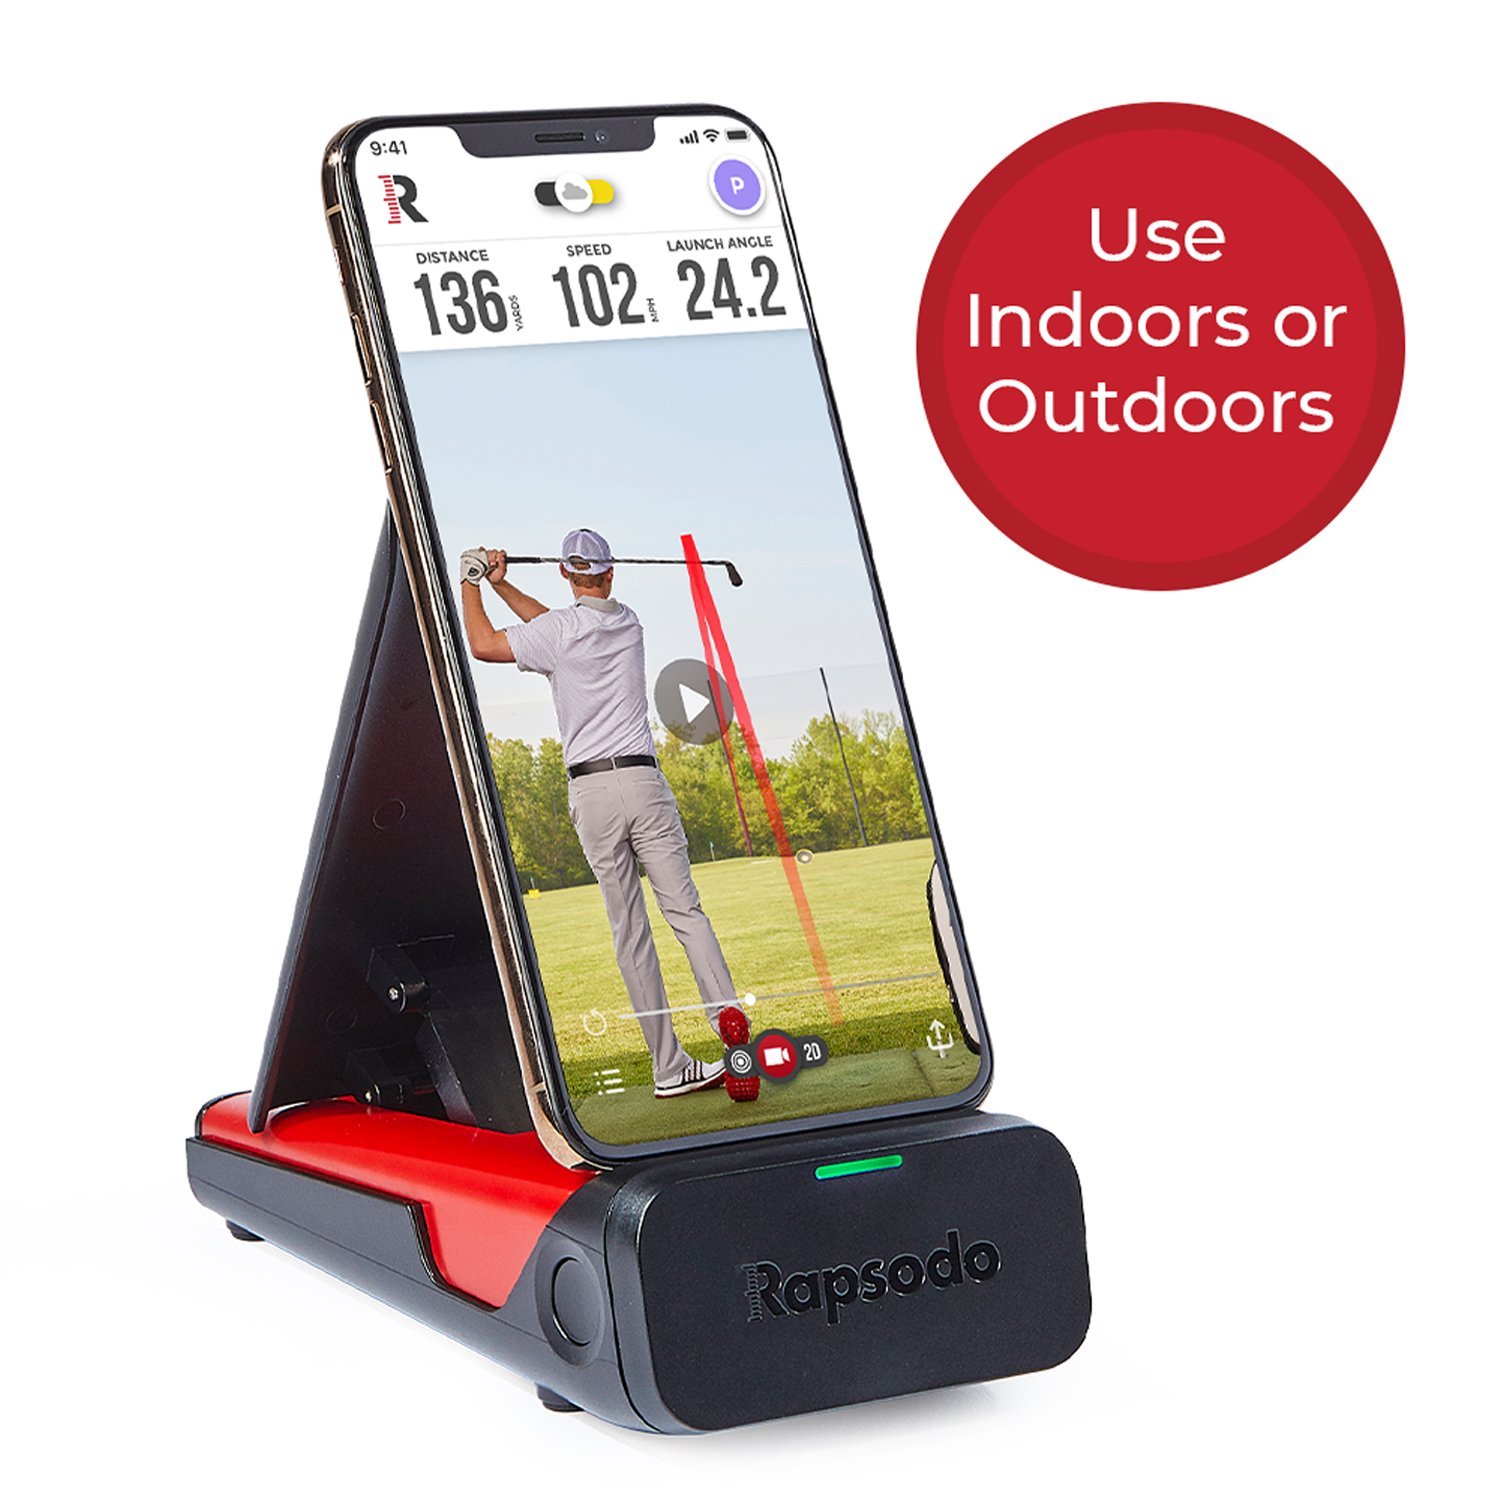 Rapsodo Mobile Launch Monitor for Golf Indoor and Outdoor Use With GPS Satellite View